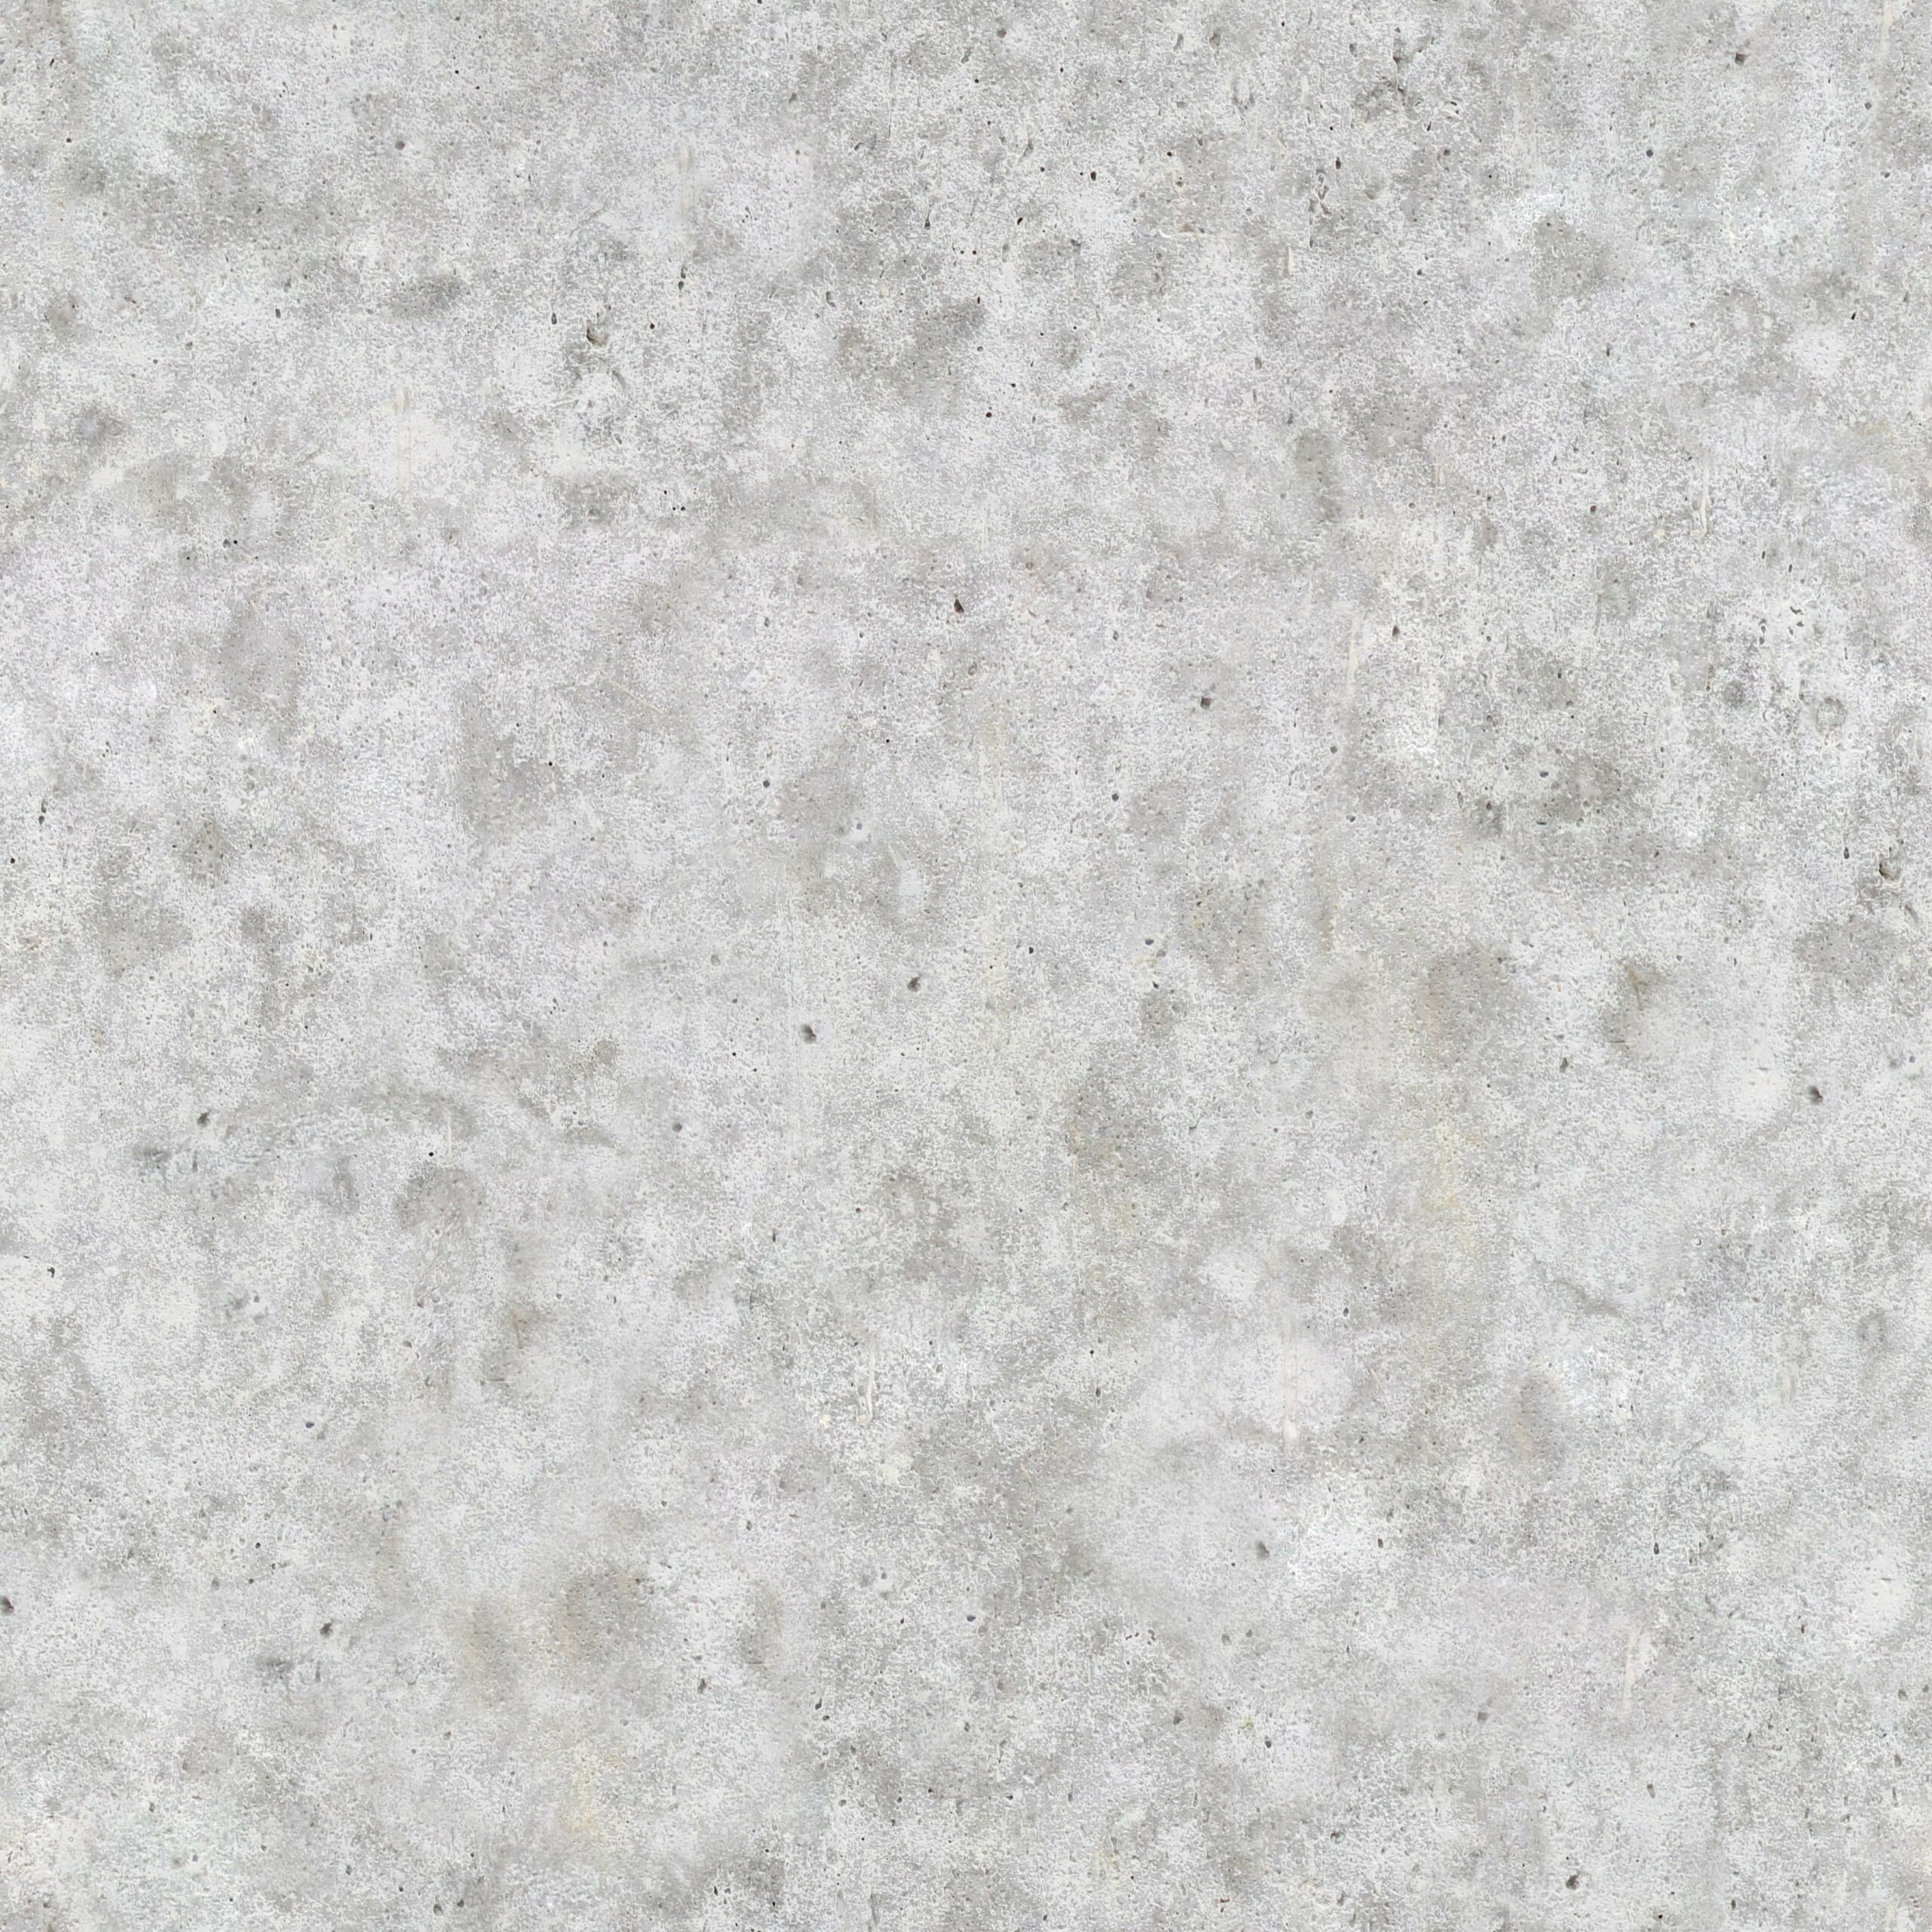 Non-uniform concrete wall – Free Seamless Textures - All rights